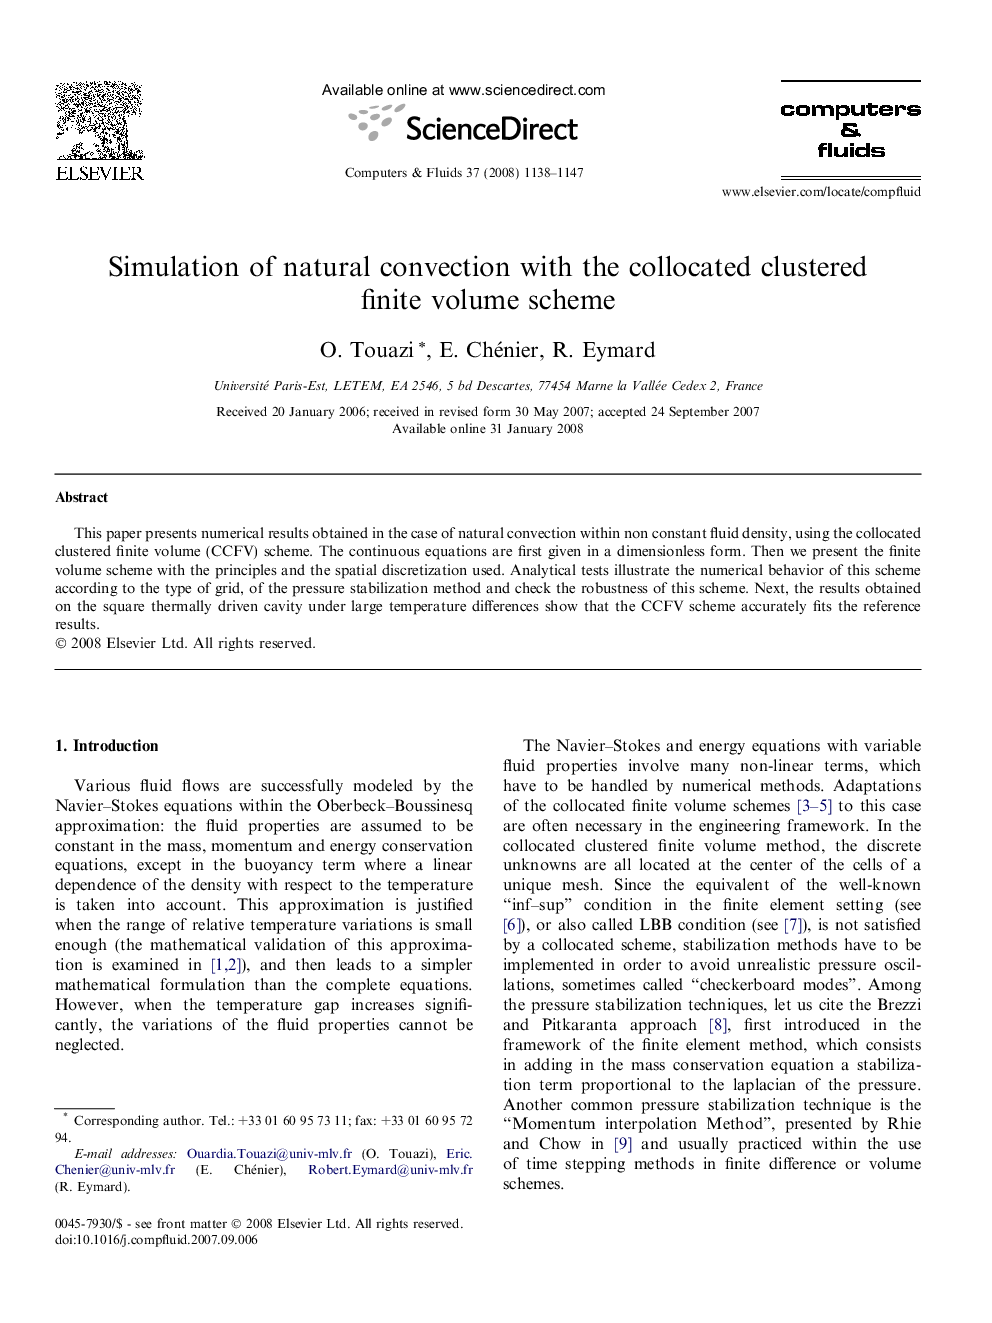 Simulation of natural convection with the collocated clustered finite volume scheme